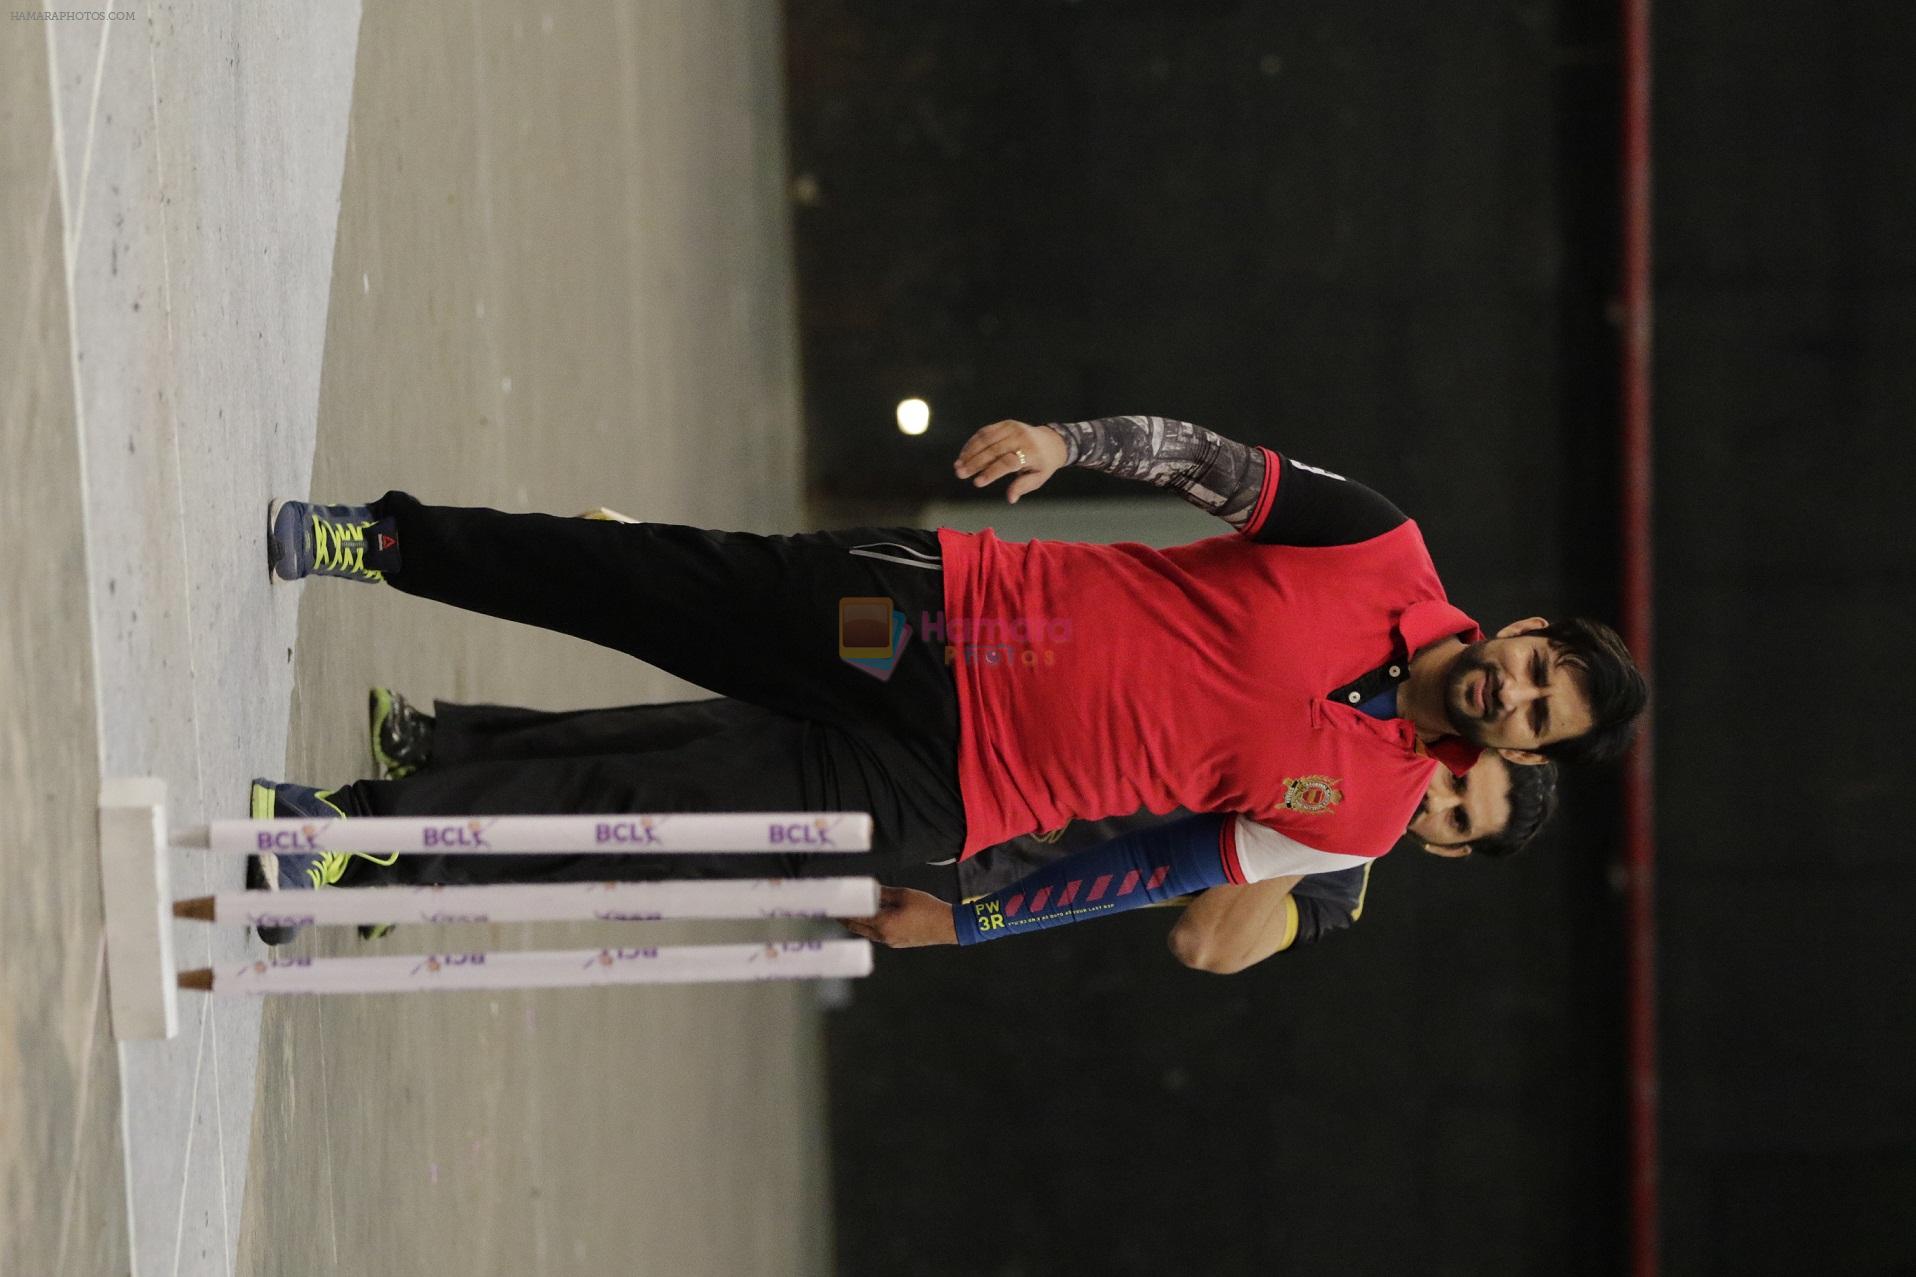 Aadesh Chaudhary at the BCL Season 2 Practice session on 17th Jan 2016